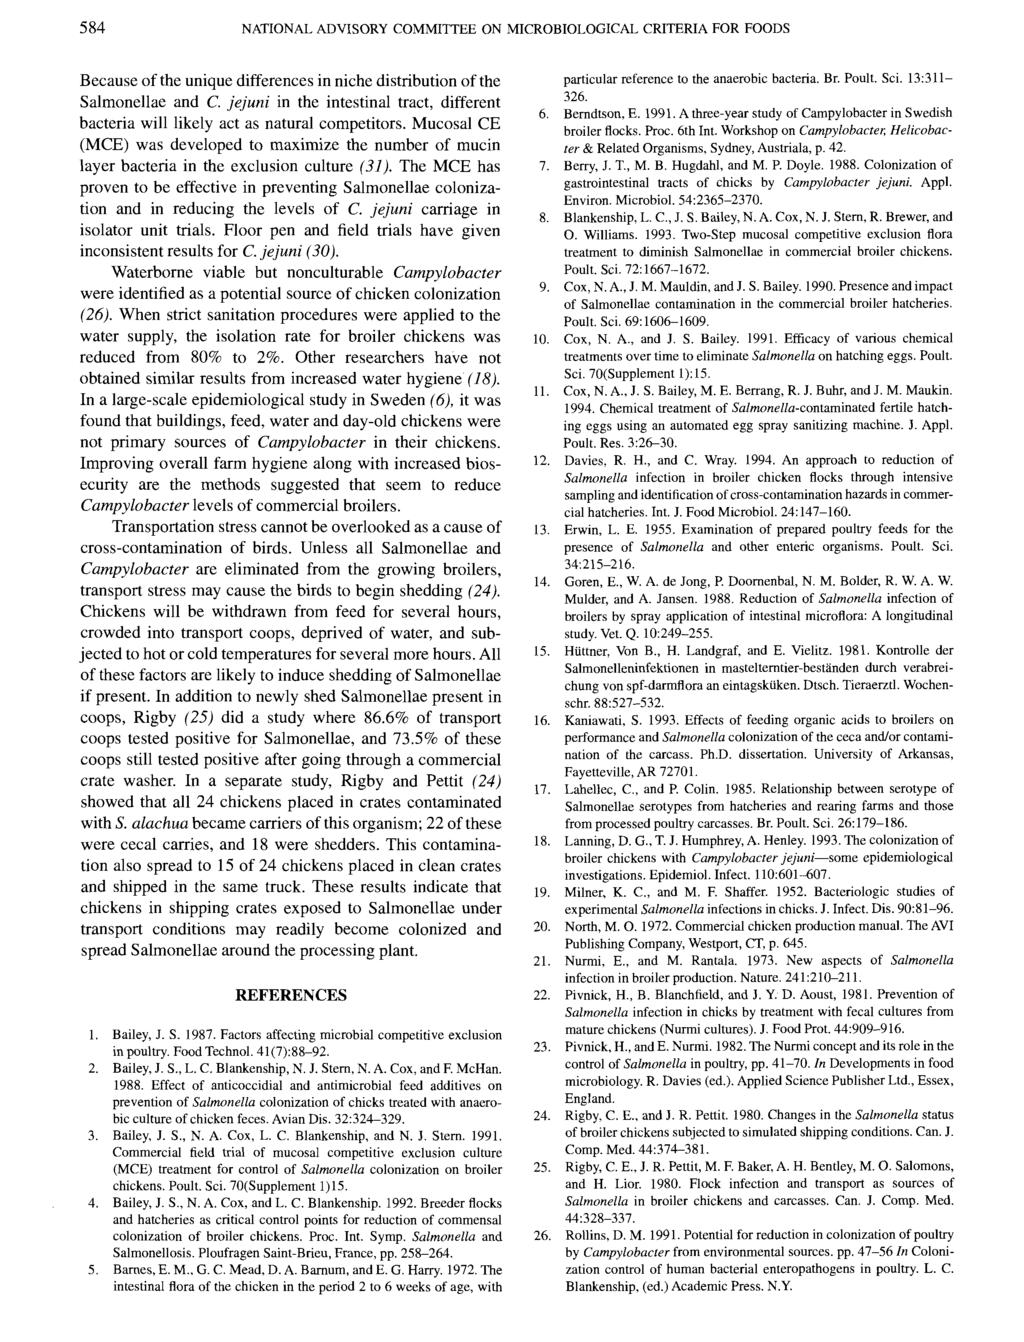 584 NATIONAL ADVISORY COMMITTEE ON MICROBIOLOGICAL CRITERIA FOR FOODS Because of the unique differences in niche distribution of the Salmonellae and C.